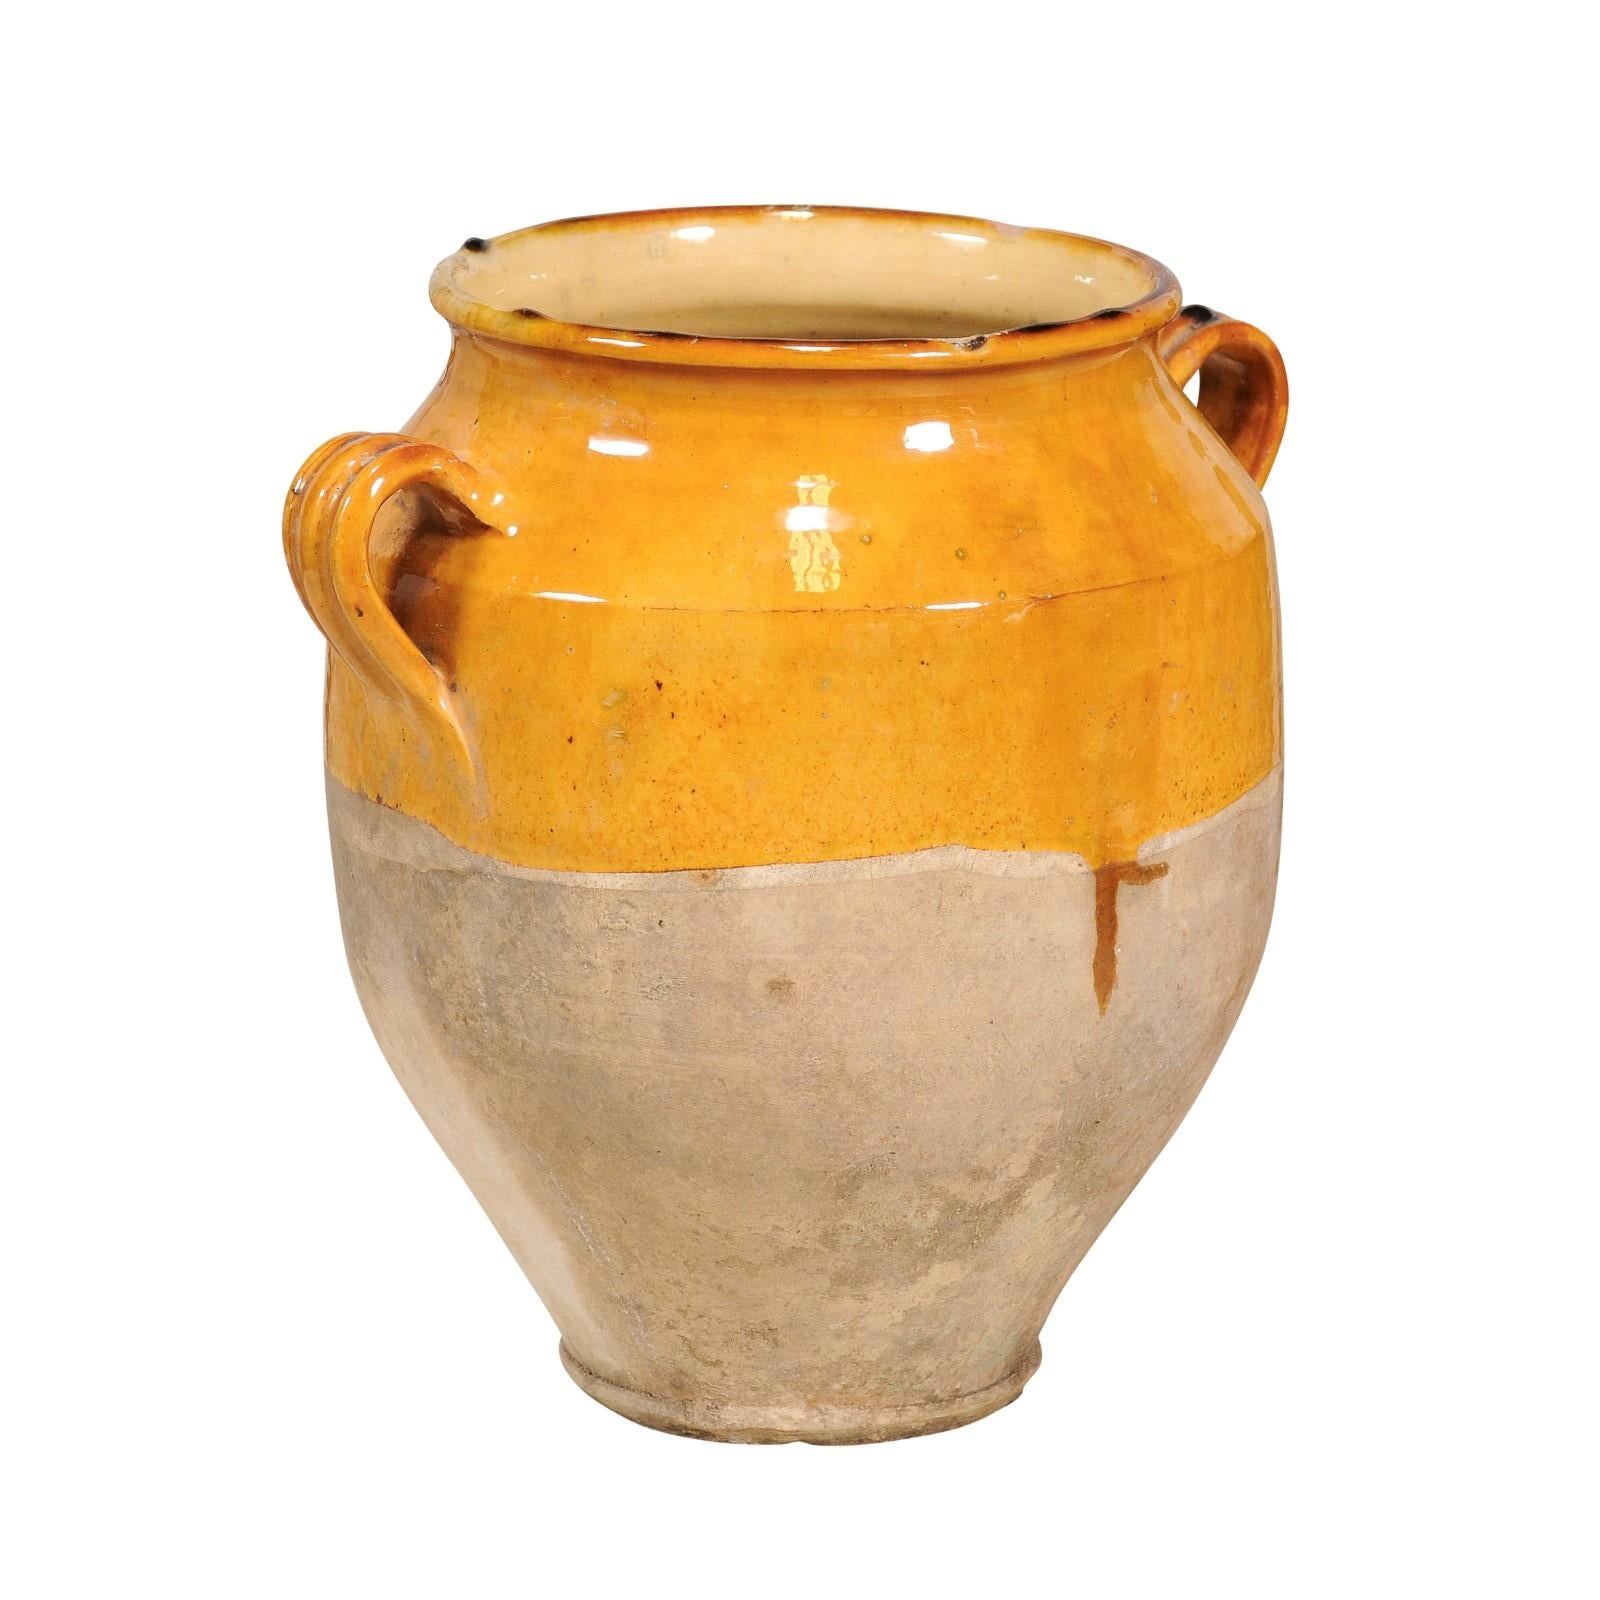 A French Provincial pot à confit pottery from the 19th century with yellow glaze, two lateral handles and rustic patina. This 19th-century French Provincial pot à confit is a charming relic of rustic culinary history, boasting a warm yellow glaze